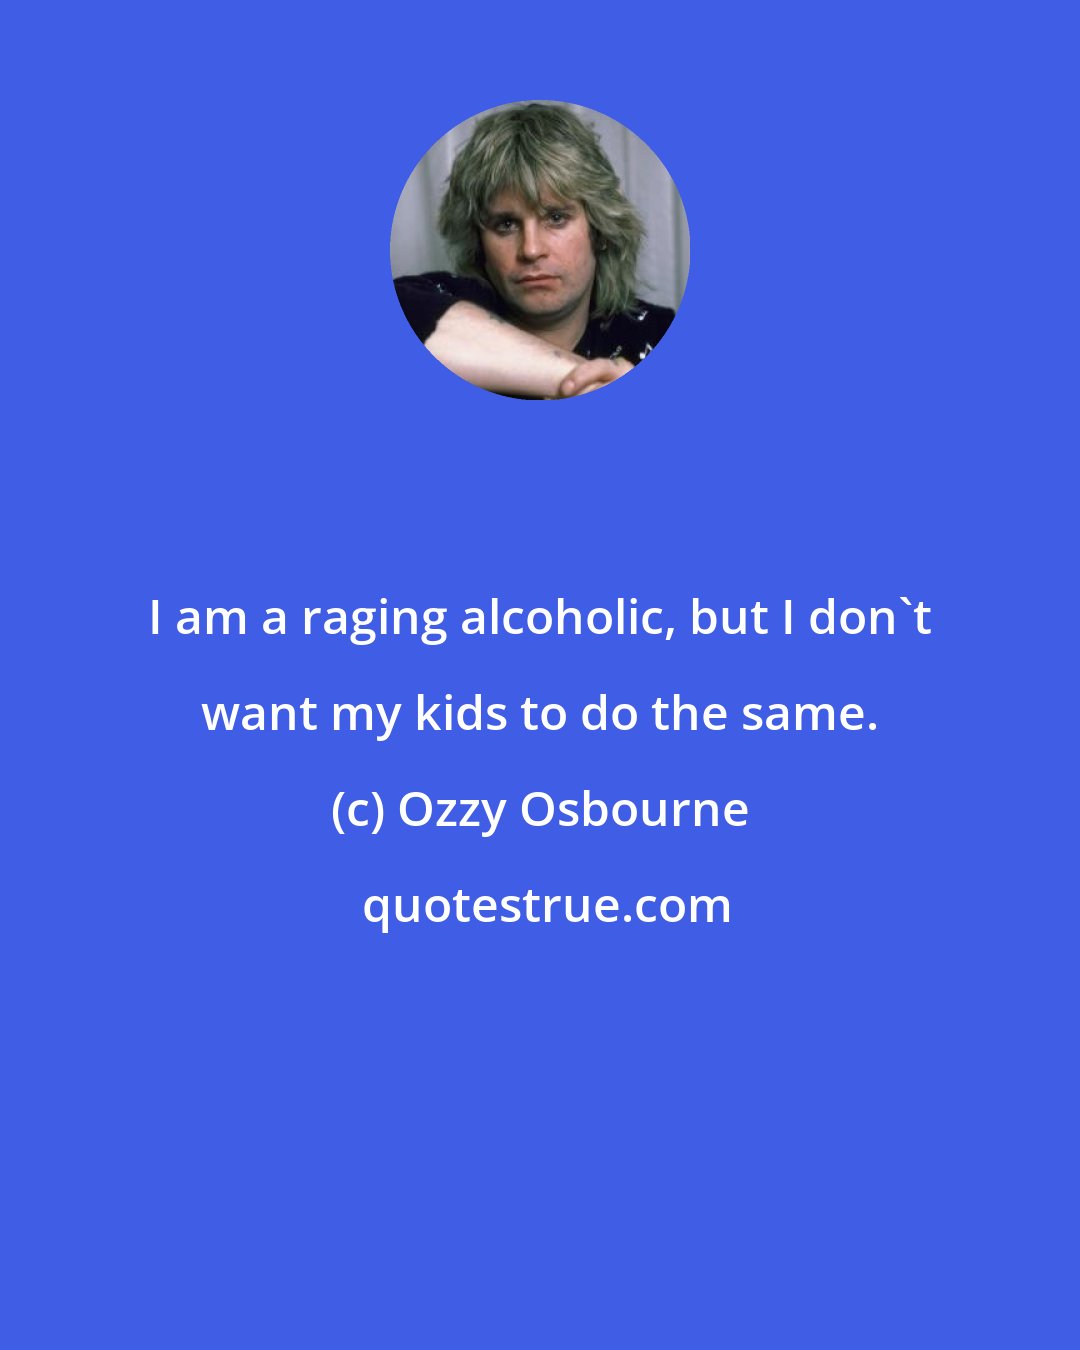 Ozzy Osbourne: I am a raging alcoholic, but I don't want my kids to do the same.